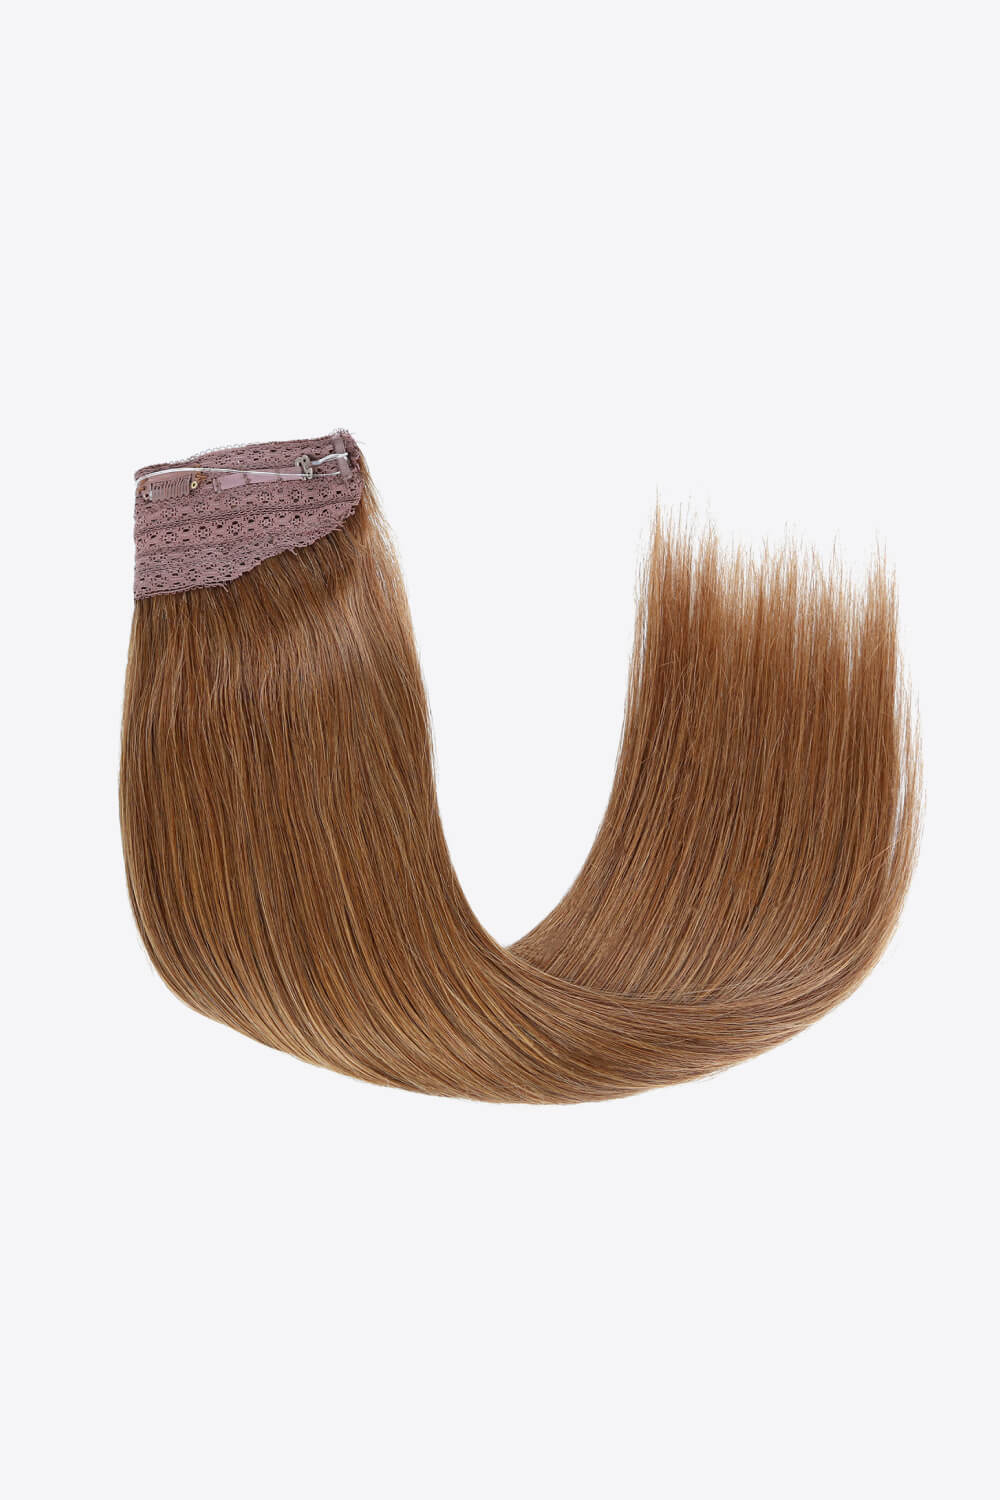 Brown/ Blonde 16" 80g Straight Indian Human Halo Hair